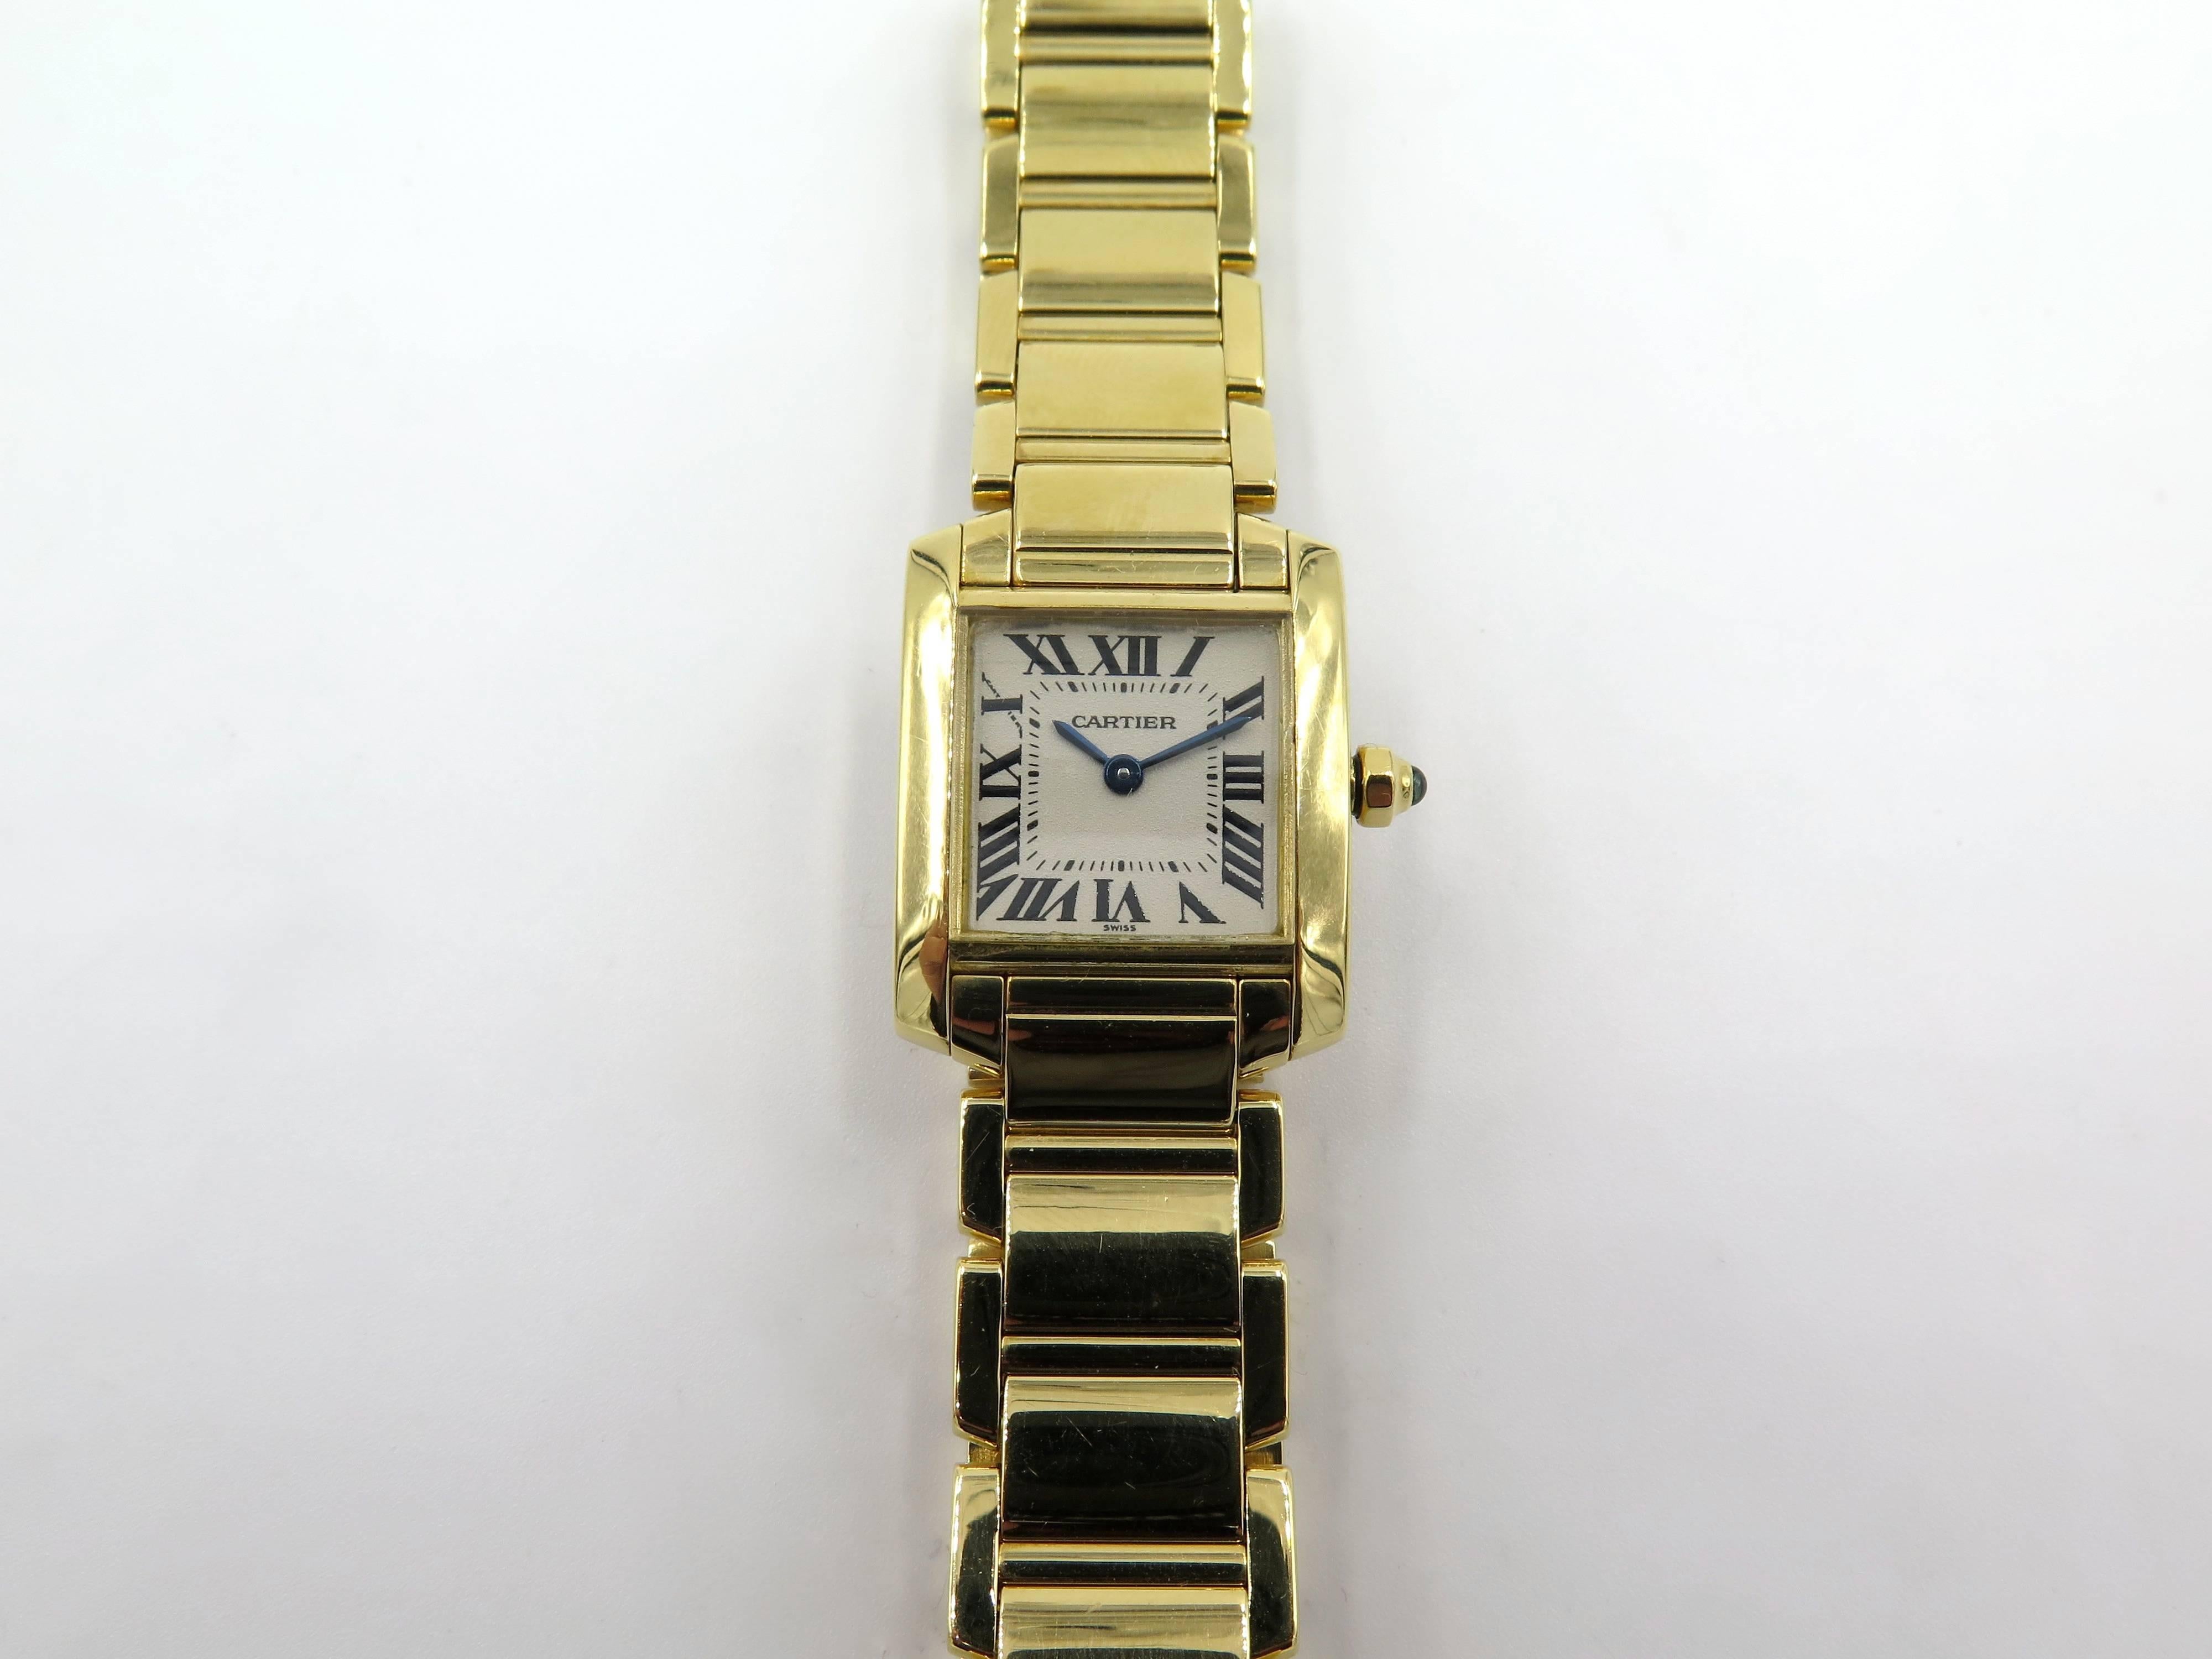 A ladies 18 karat yellow gold Cartier Tank Francaise watch.  18K yellow gold 20mm x 23mm Cartier Tank Française watch featuring a quartz movement, smooth bezel, flat ivory dial, 18K yellow gold link bracelet , sapphire crown and  double deployant